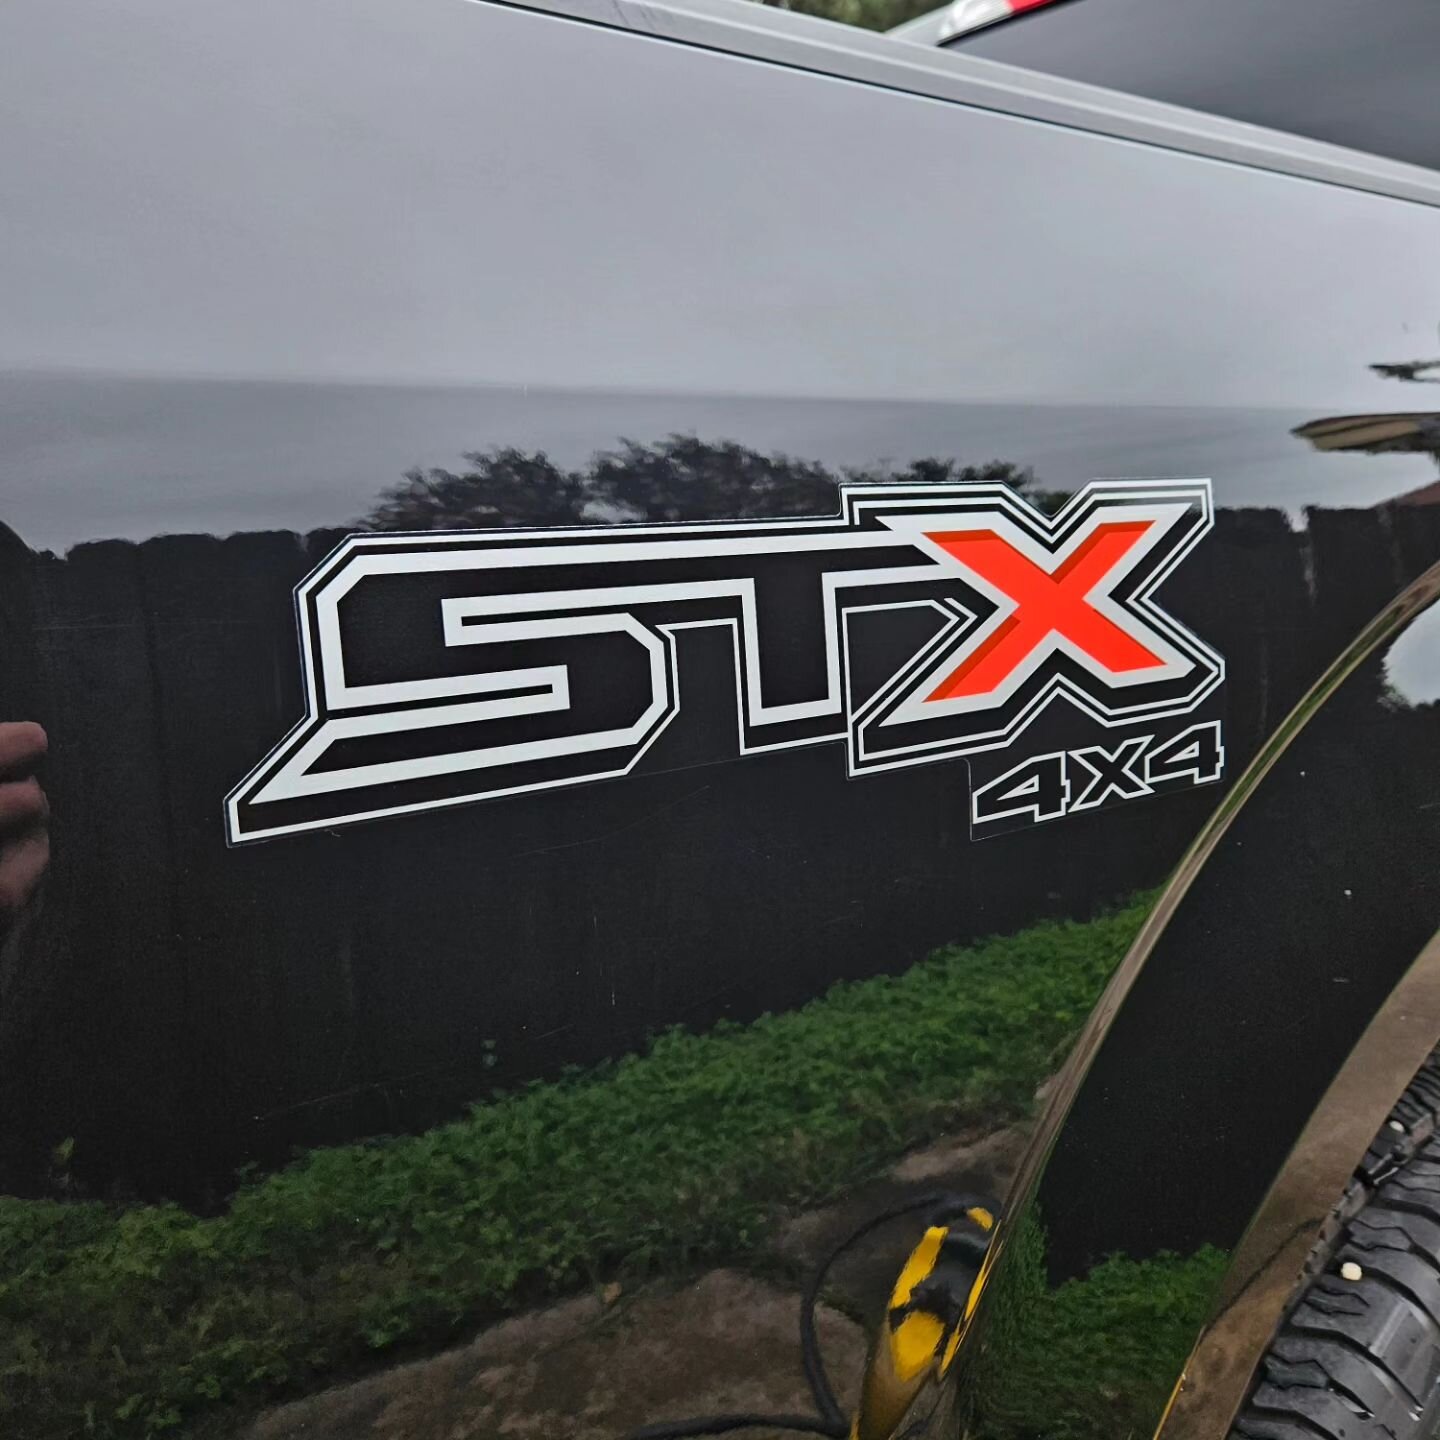 You want to remove or change up the look of your vehicle with some new vinyl decals?

We provide that service for you at the comfort of your own home or work place. We can order the decals for you pr we can provide a discount if decals provided by yo